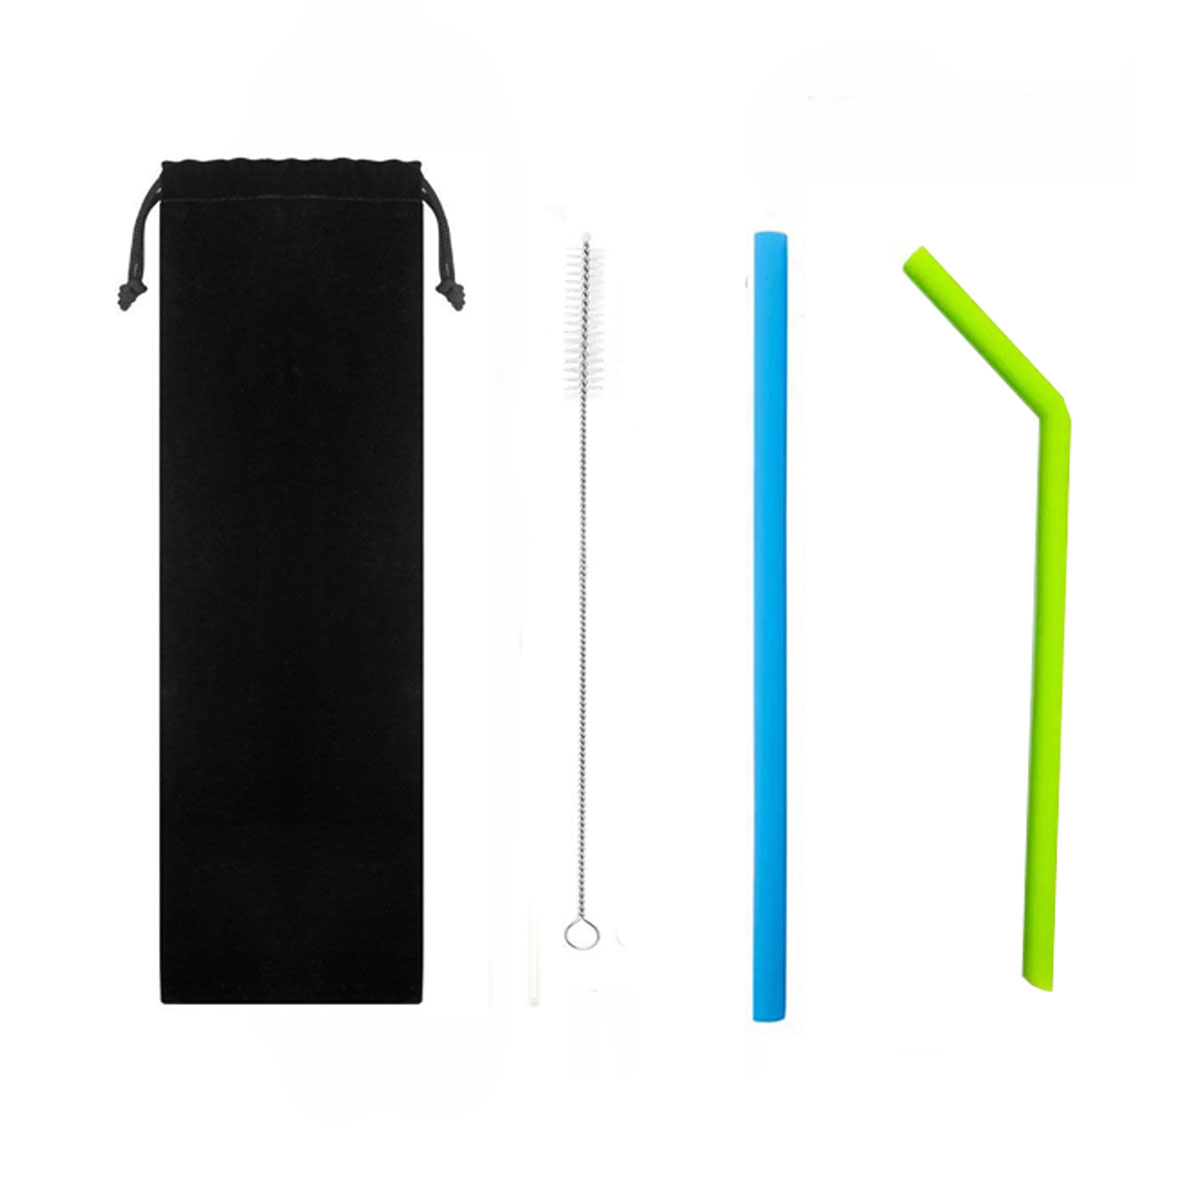 GL-AAJ1095 3 in 1 Drinking Silicone Straws Set with Cleaning Brush